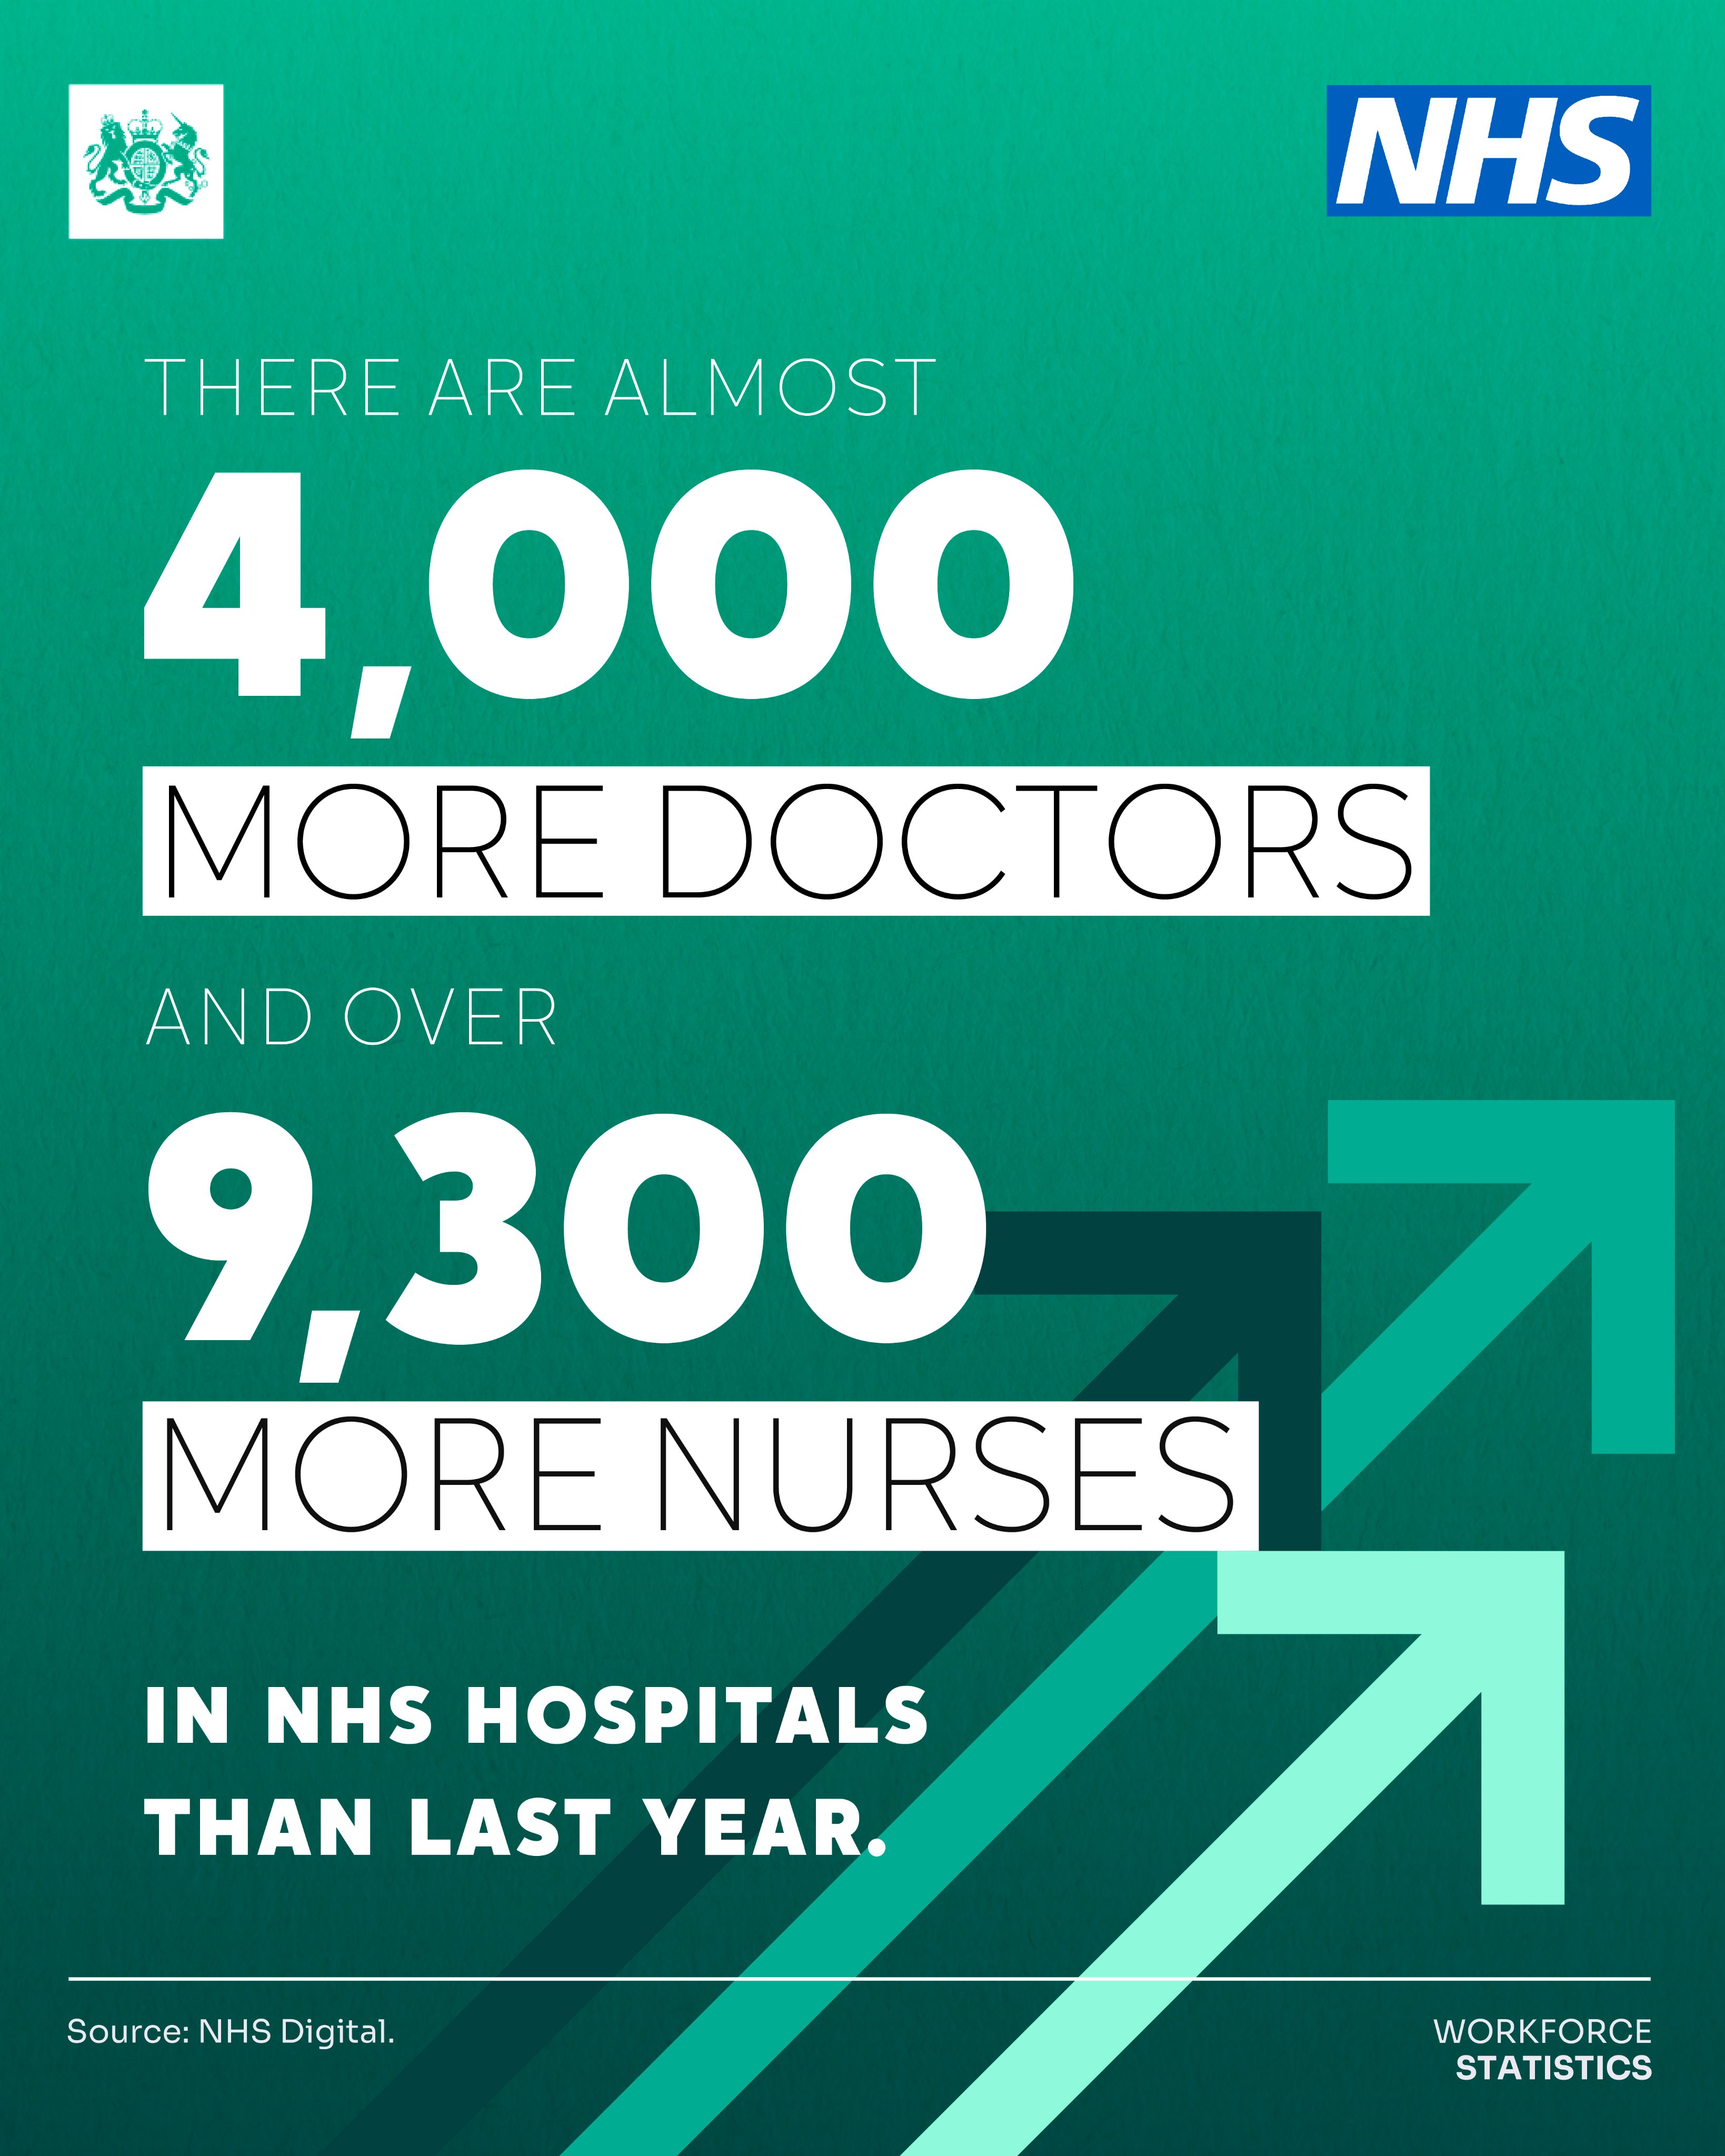 Record Numbers Of NHS Doctors And Nurses Working In The NHS